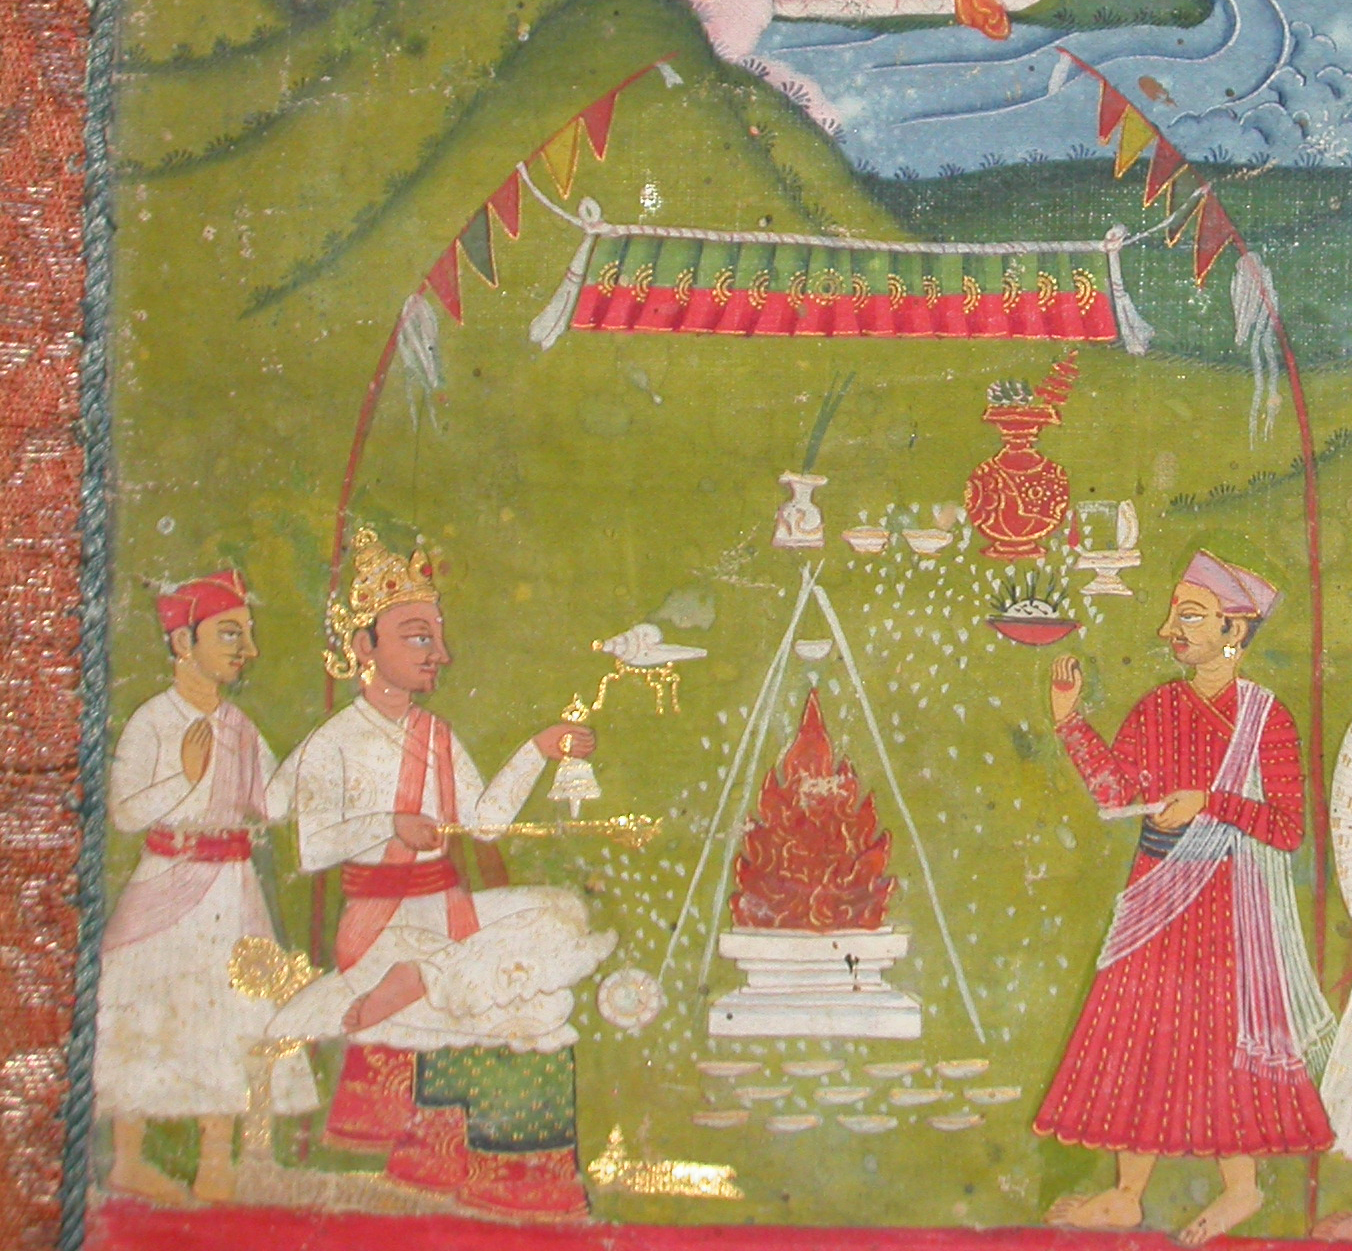 Priest in red garment at right casts white material into fire at center, with white-robed attendants at left